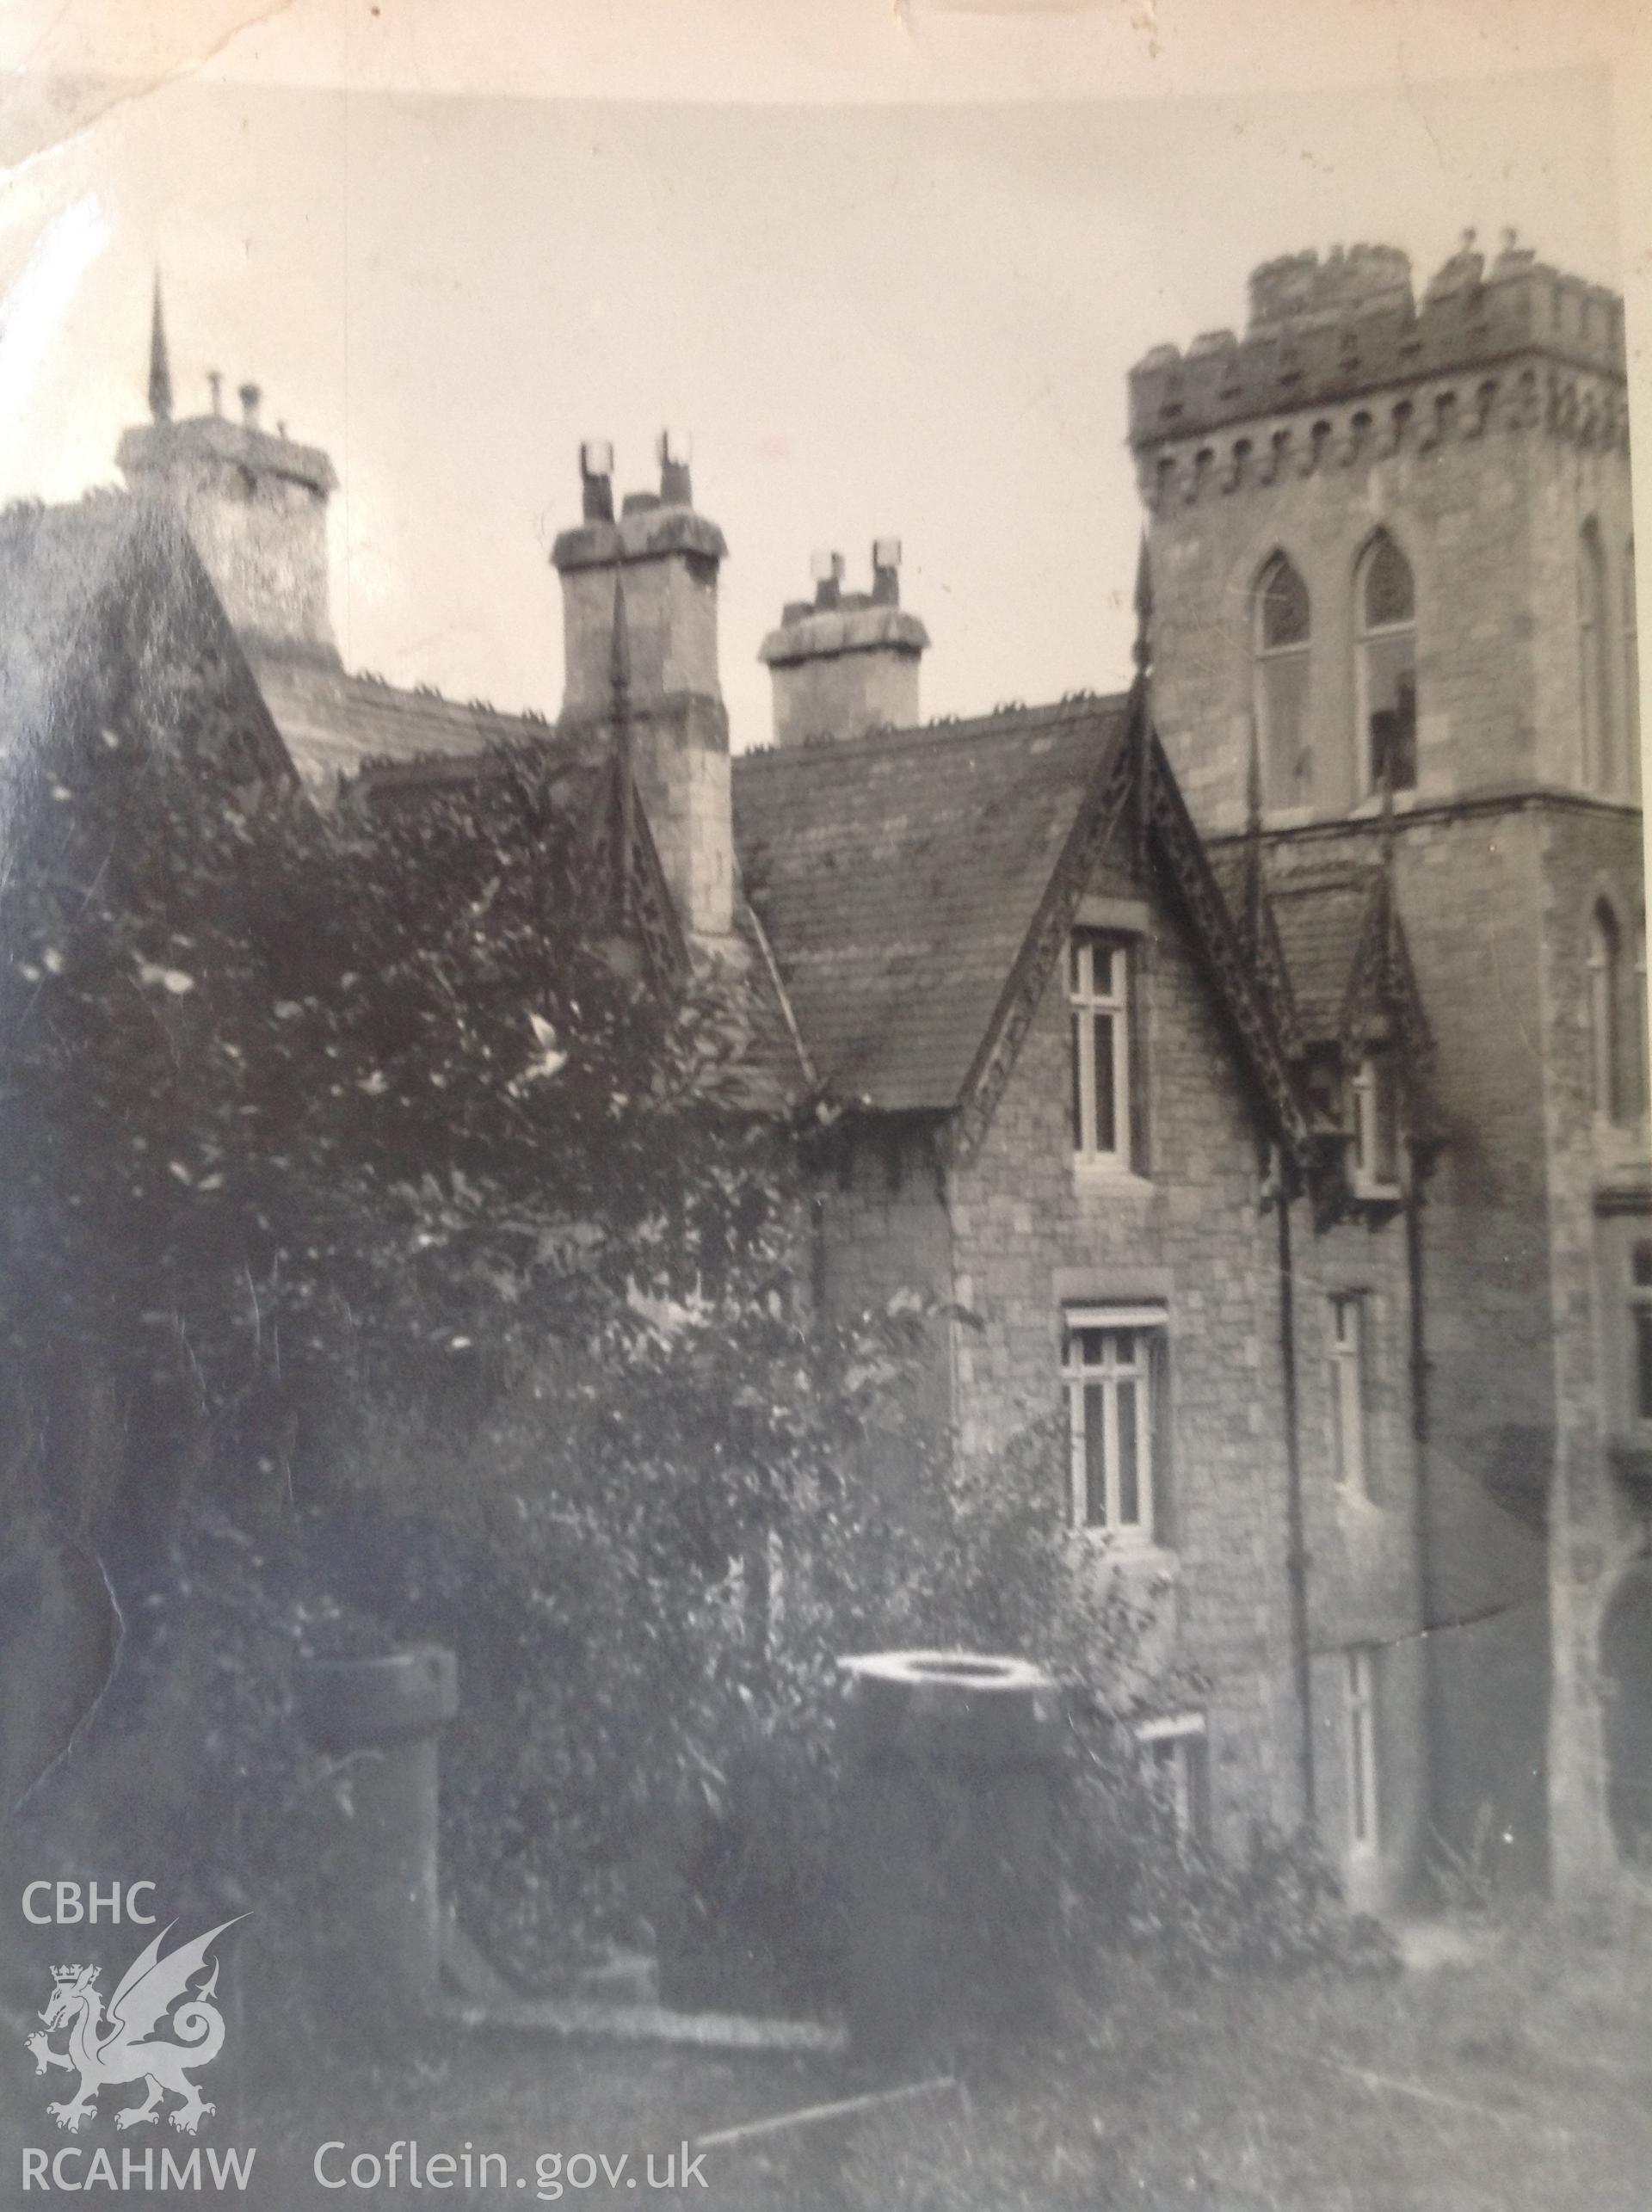 Digital copy of photograph showing exterior view of Bryngwenallt Hall, c. 1961. Digital copy donated by Gilian Swan, January 2022.